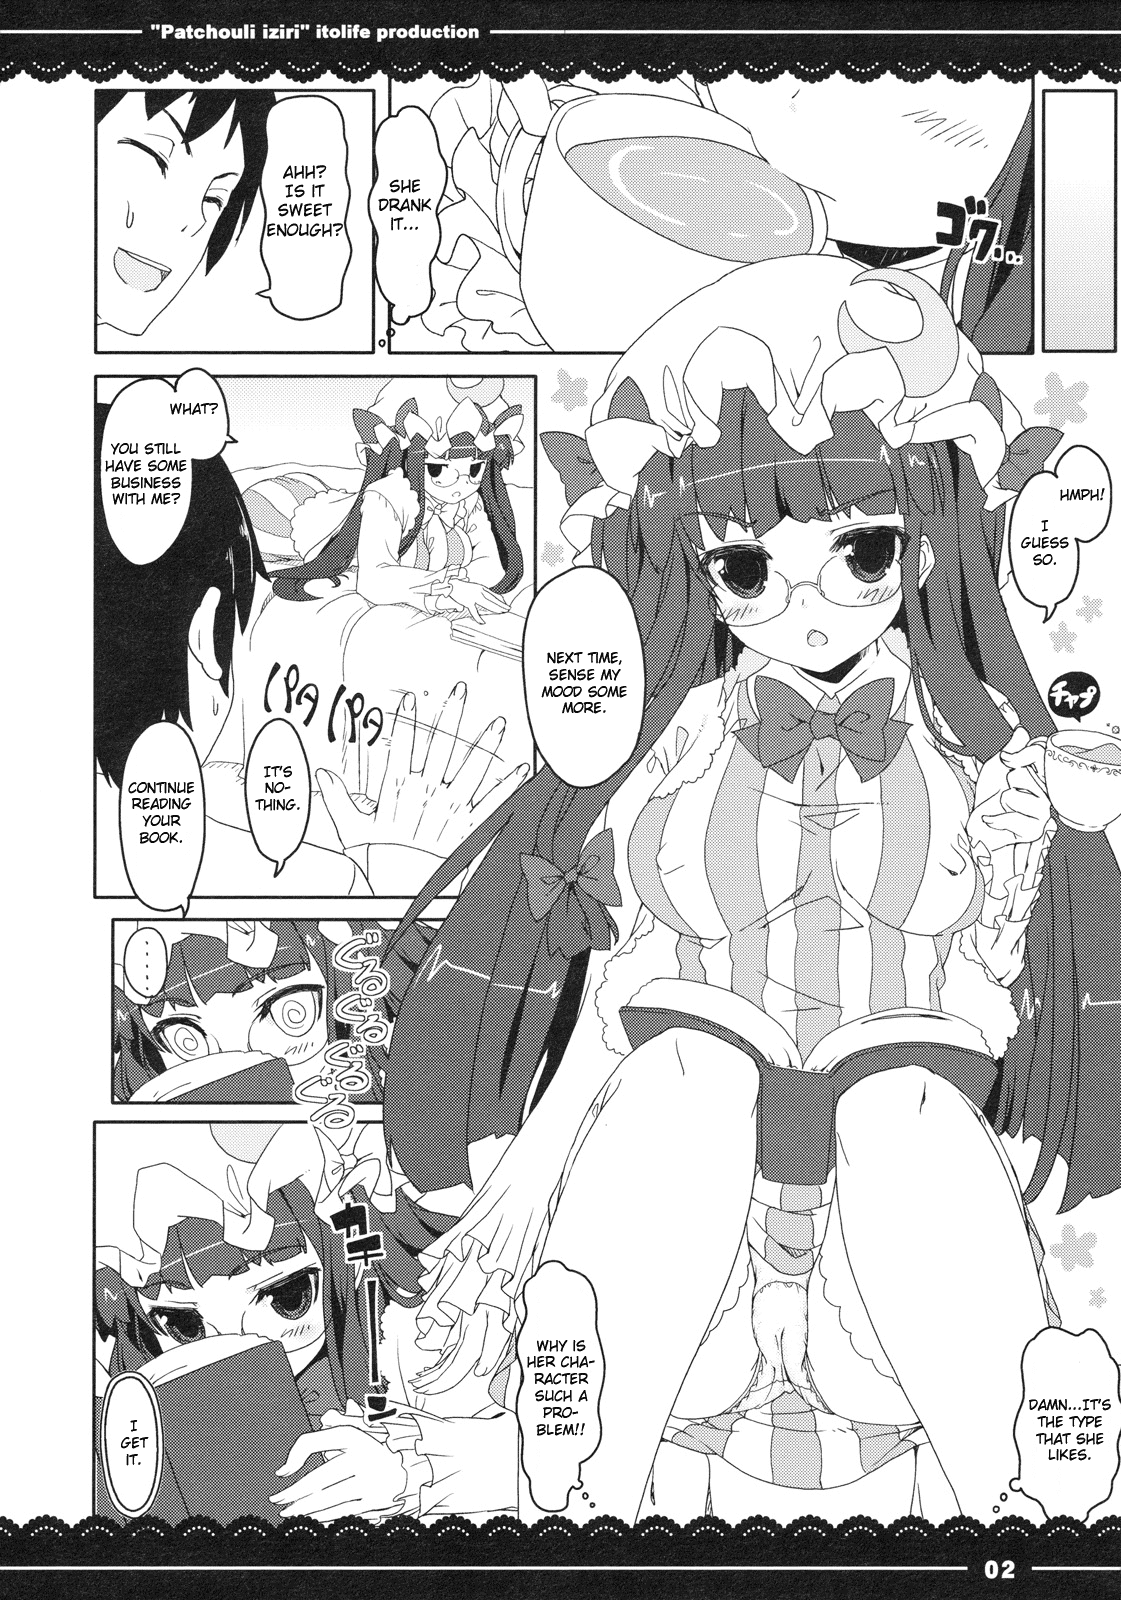 (C79) [Ito Life] Patchouli Ijiri (Touhou Project) [English] [CGRascal] (C79) [伊東ライフ] パチュリイジリ (東方Project) [英訳]